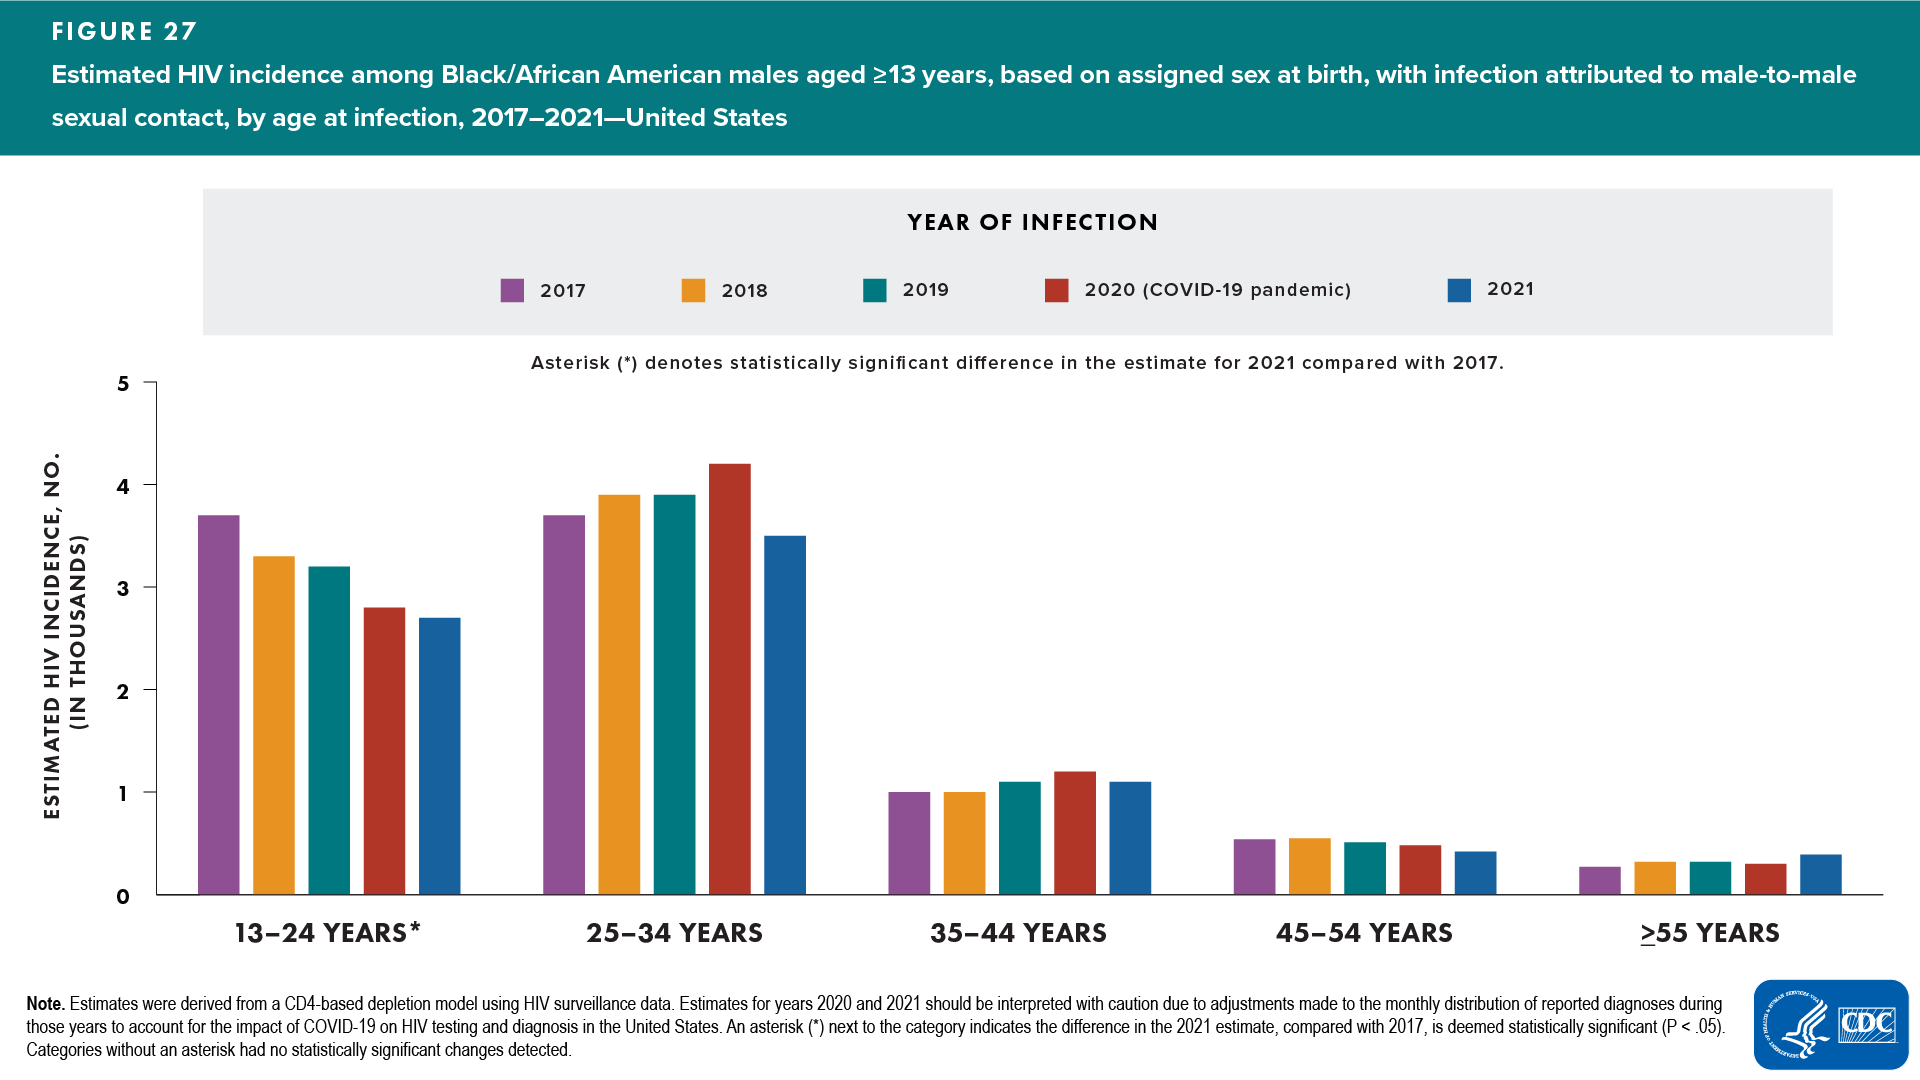 Figure 27. Estimated HIV incidence among Black/African American males aged ≥13 years, based on assigned sex at birth, with infection attributed to male-to-male sexual contact, by race/ethnicity, 2017–2021—United States